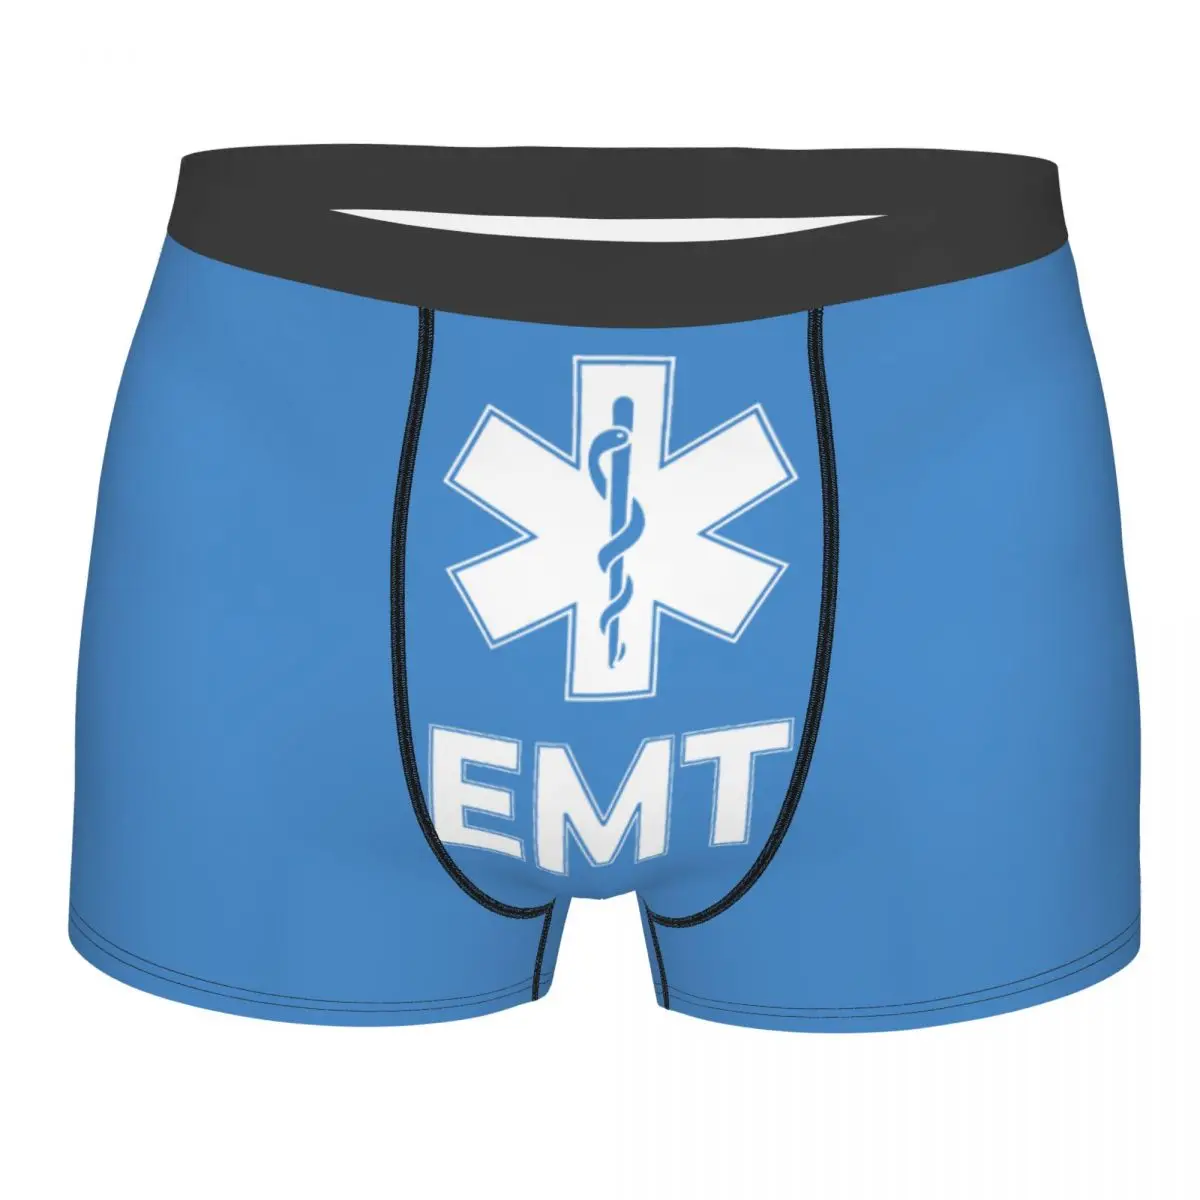 

Emt Star Of Life Paramedic Men's Underwear Medic Ambulance Boxer Shorts Panties Humor Soft Underpants for Male Plus Size